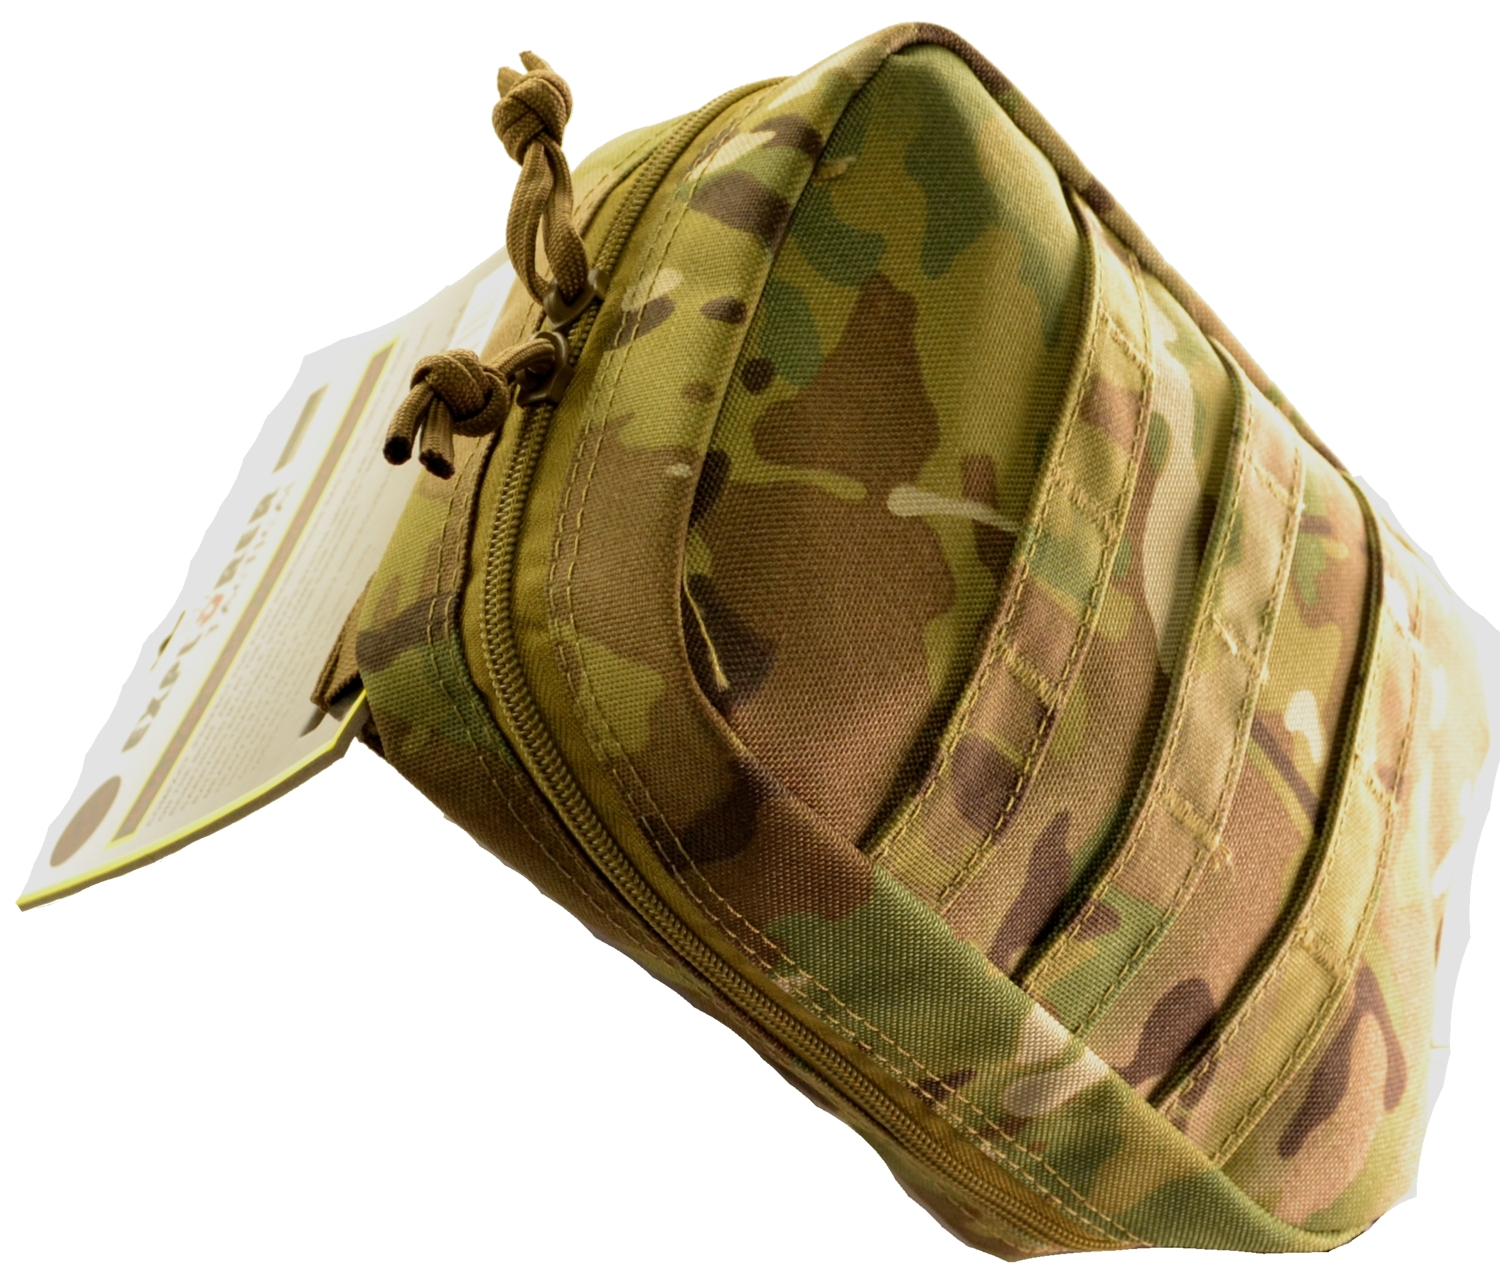 P14 IFAK Pouch This universal pouch can be used as a mag pouch, clip holder, or a first responder bag to be use at home, on the boat or at the cabin. It has reinforced m.o.l.l.e strap system which allows the user to “wear” rather than “carry” their equipment. Equipped with high quality elastic straps inside and quick release pulling cord on zipper for quick access P14 IFAK Pouch This universal pouch can be used as a mag pouch, clip holder, or a first responder bag to be use at home, on the boat or at the cabin. It has reinforced m.o.l.l.e strap system which allows the user to “wear” rather than “carry” their equipment. Equipped with high quality elastic straps inside and quick release pulling cord on zipper for quick access